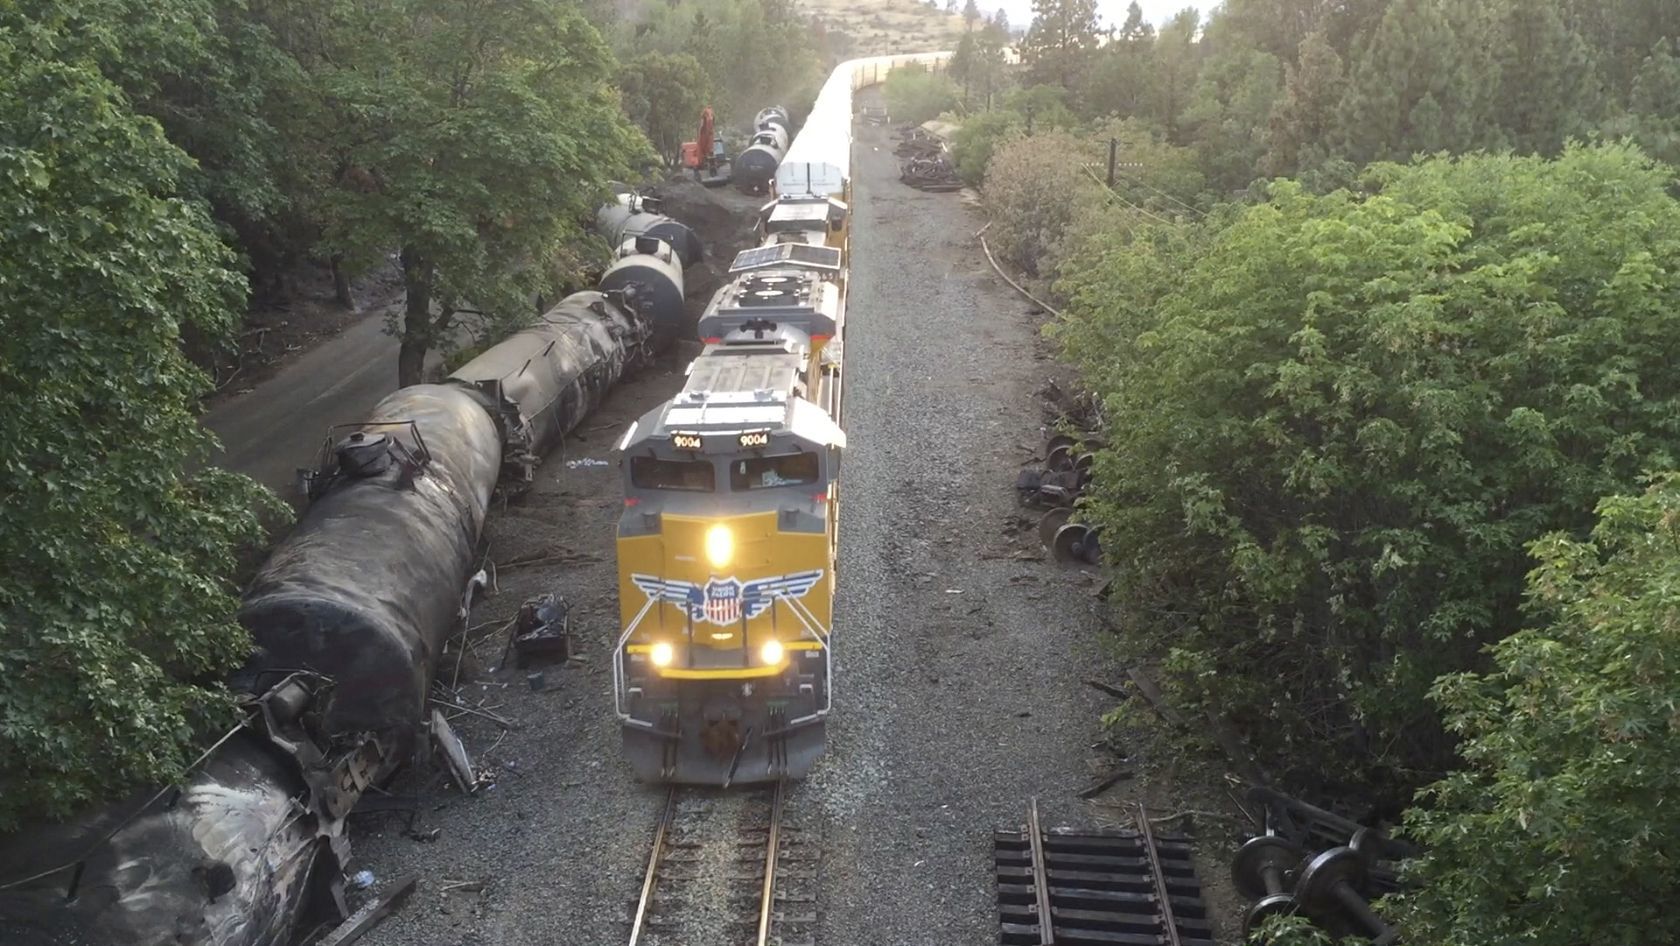 This June 6 photo taken from a drone shows crumpled oil tankers lying beside the railroad tracks after a fiery train derailment on June 3 that prompted evacuations from the tiny Columbia River Gorge town about 70 miles east of Portland in Mosier, Oregon.